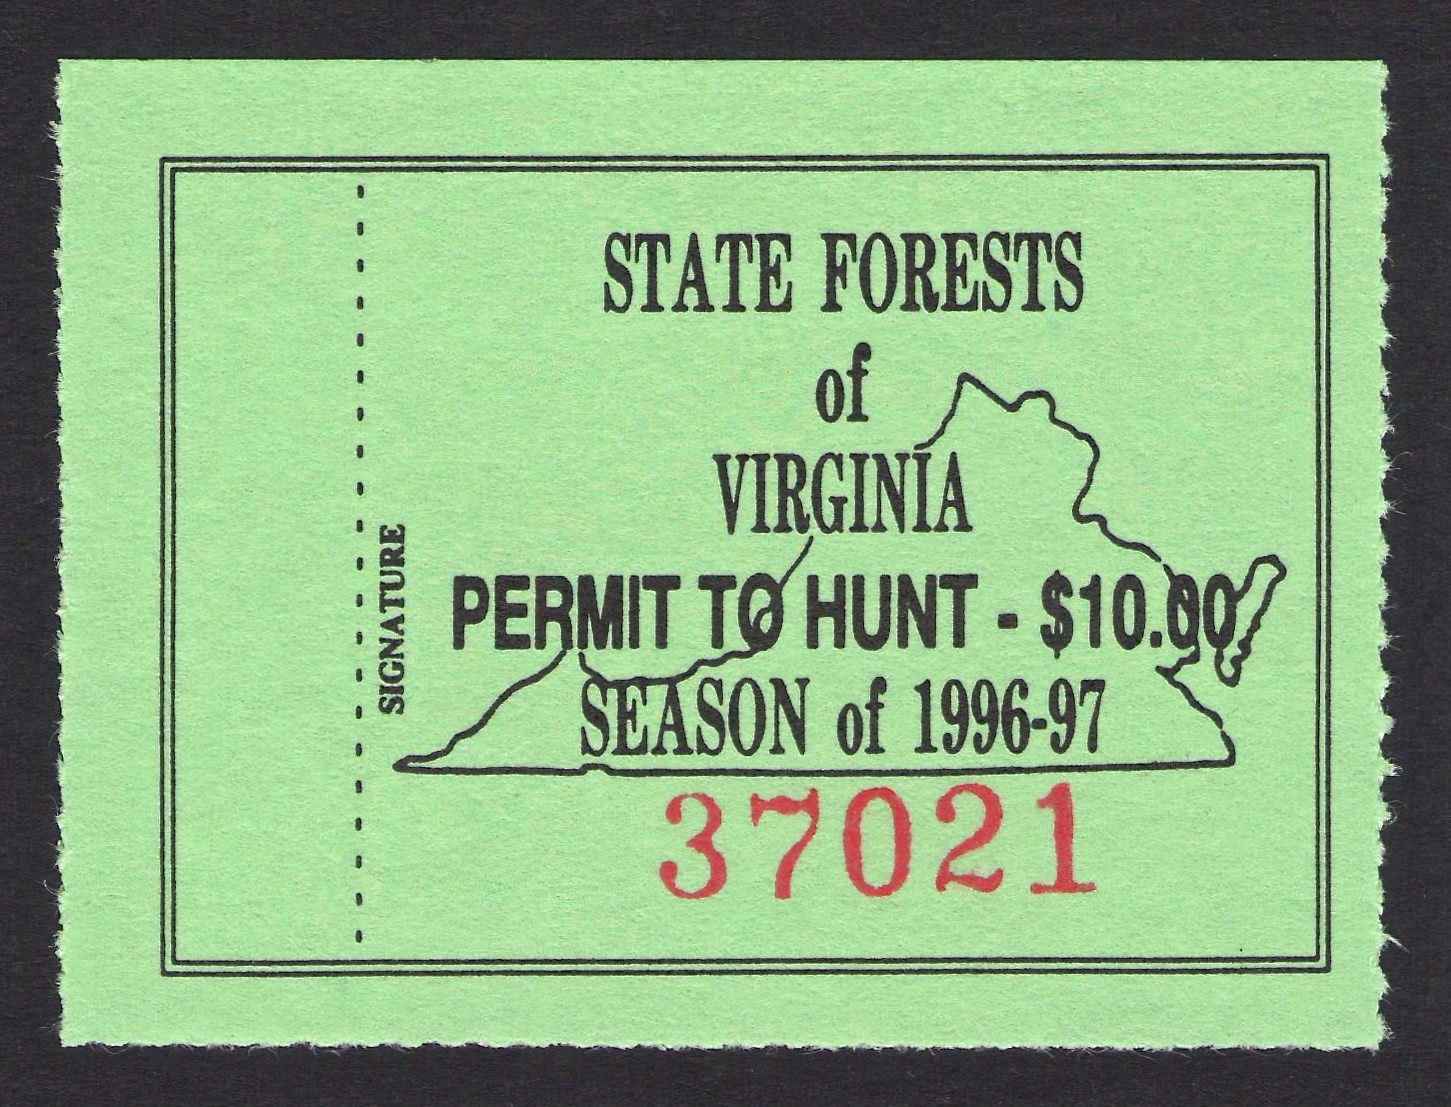 1996-97 Virginia State Forest